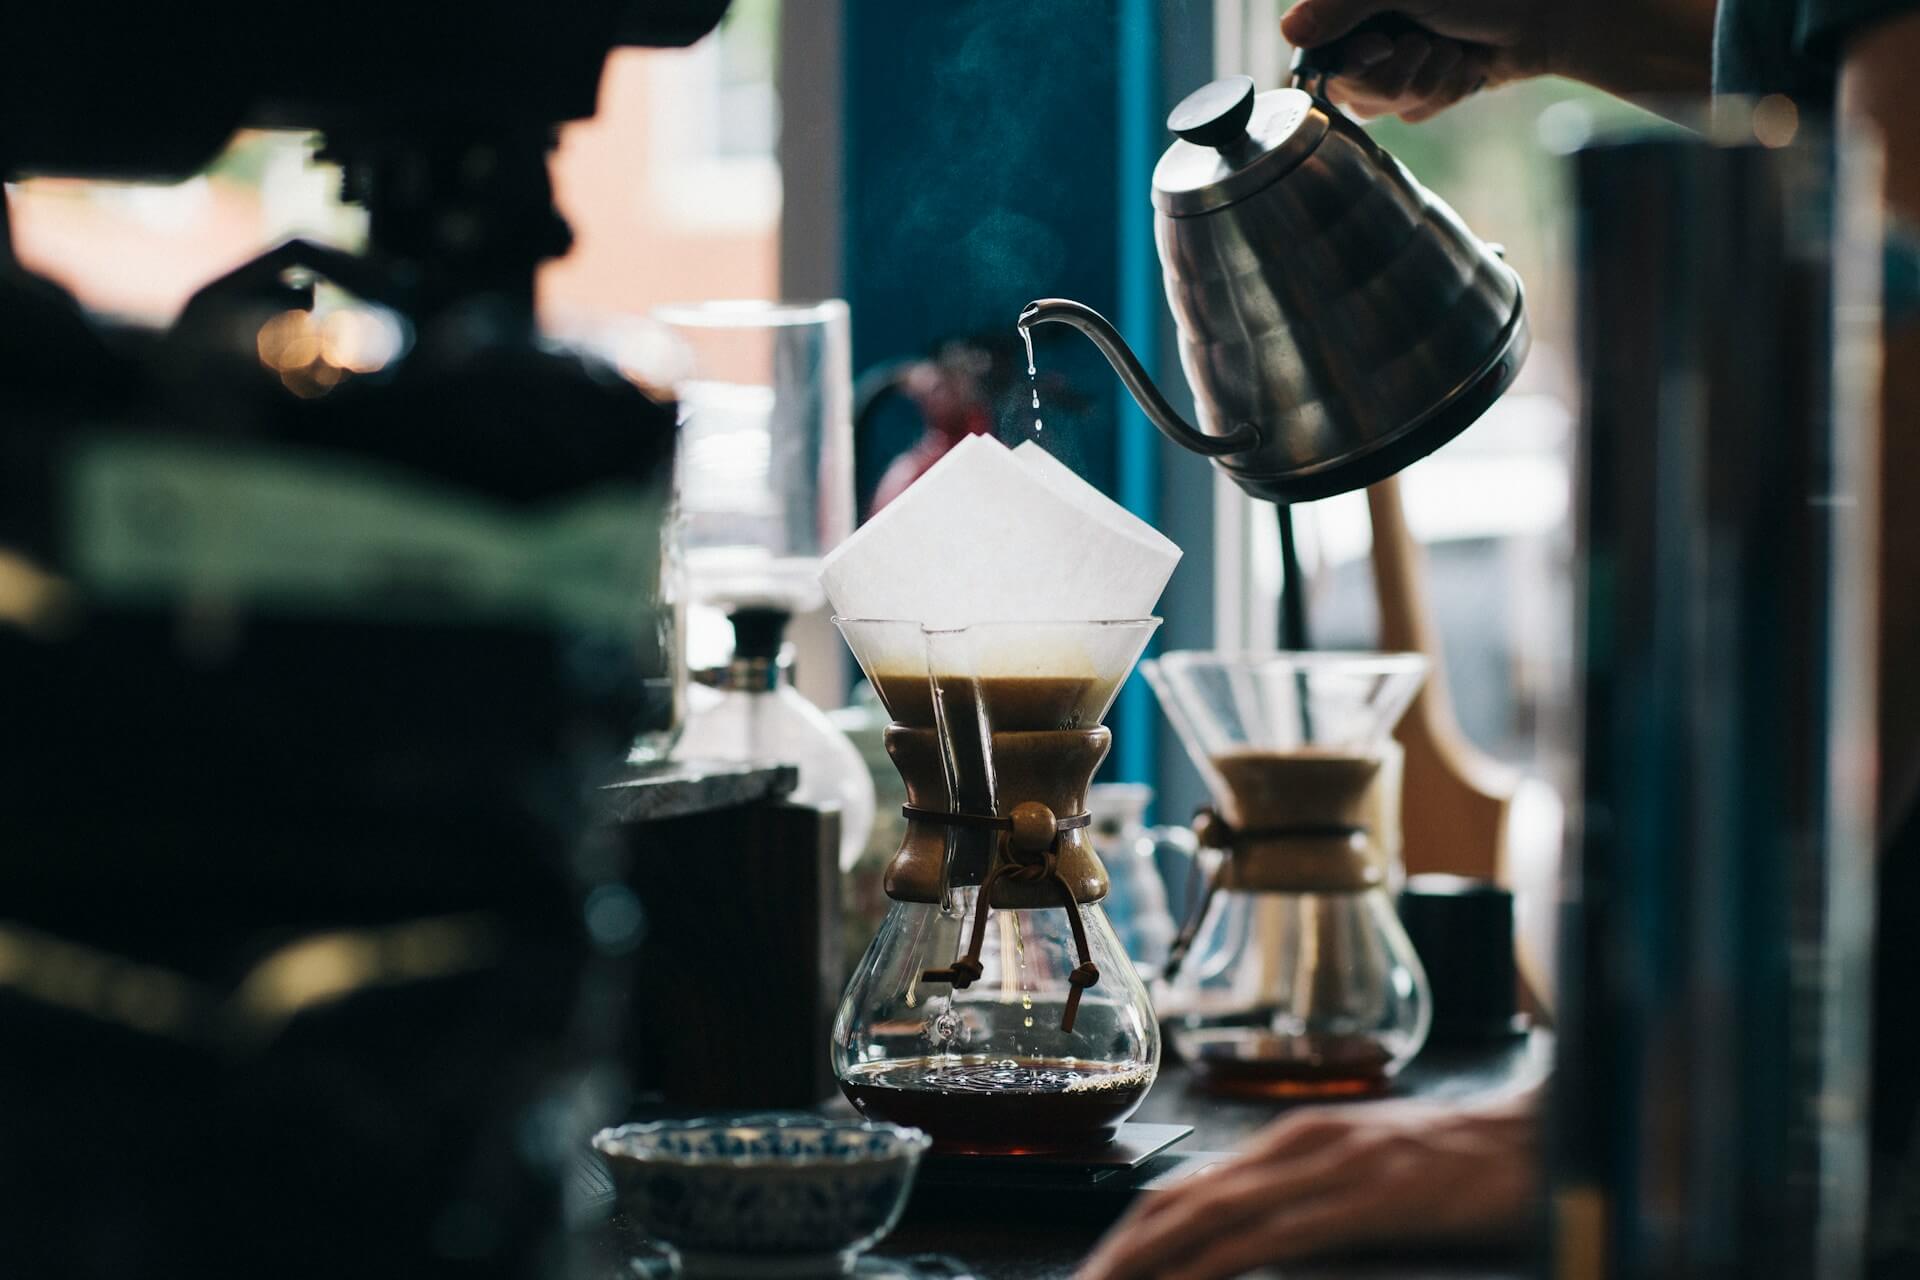 Experimenting can help find your perfect brew. Photo by <a href="https://unsplash.com/@kfred?utm_content=creditCopyText&utm_medium=referral&utm_source=unsplash">Karl Fredrickson</a> on <a href="https://unsplash.com/photos/person-filling-glass-container-TYIzeCiZ_60?utm_content=creditCopyText&utm_medium=referral&utm_source=unsplash">Unsplash</a>